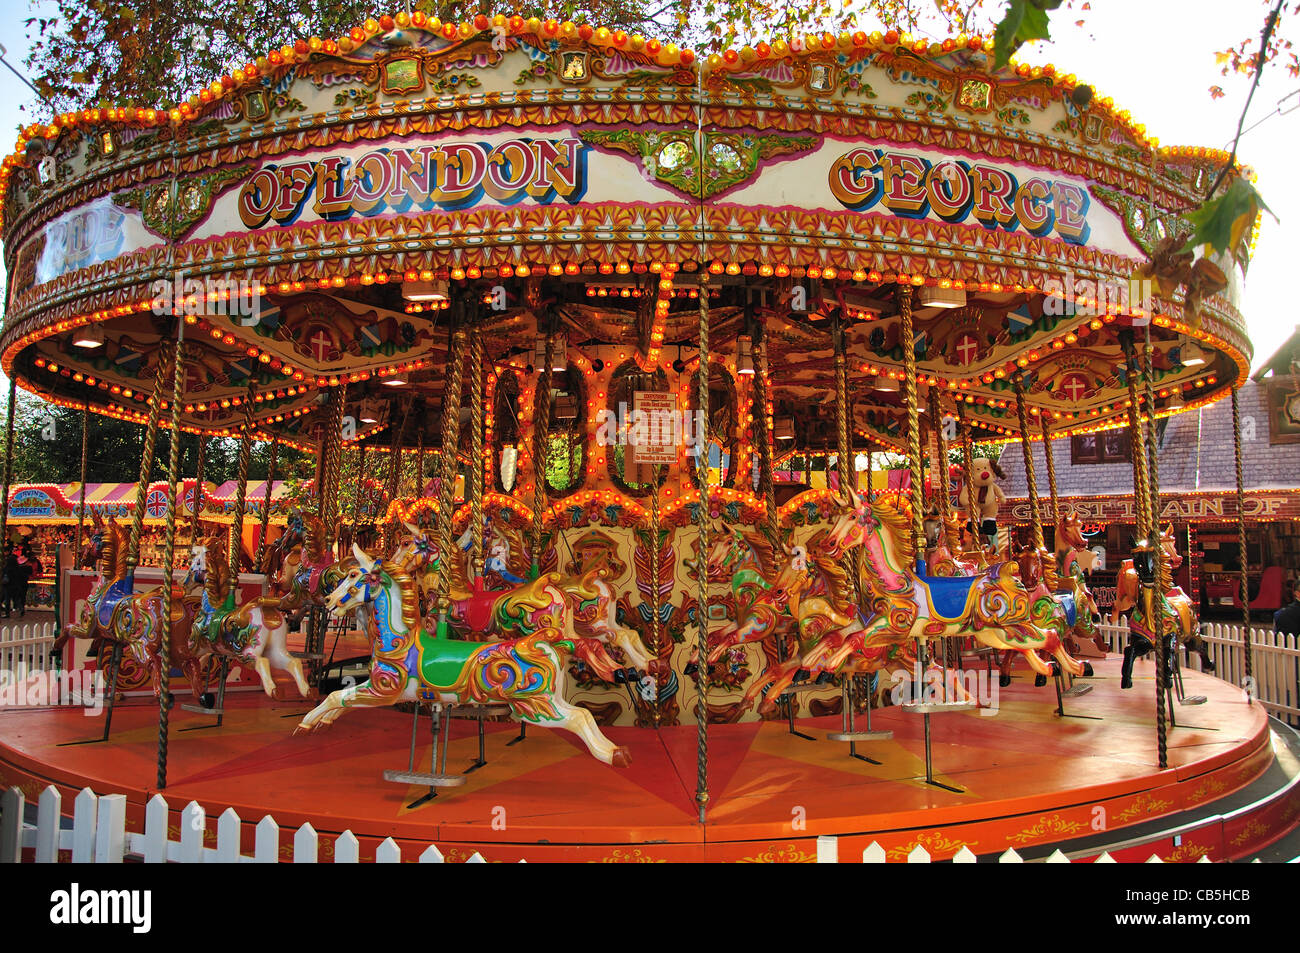 Carousel at 'Winter Wonderland' Hyde Park, City of Westminster, London, Greater London, England, United Kingdom Stock Photo